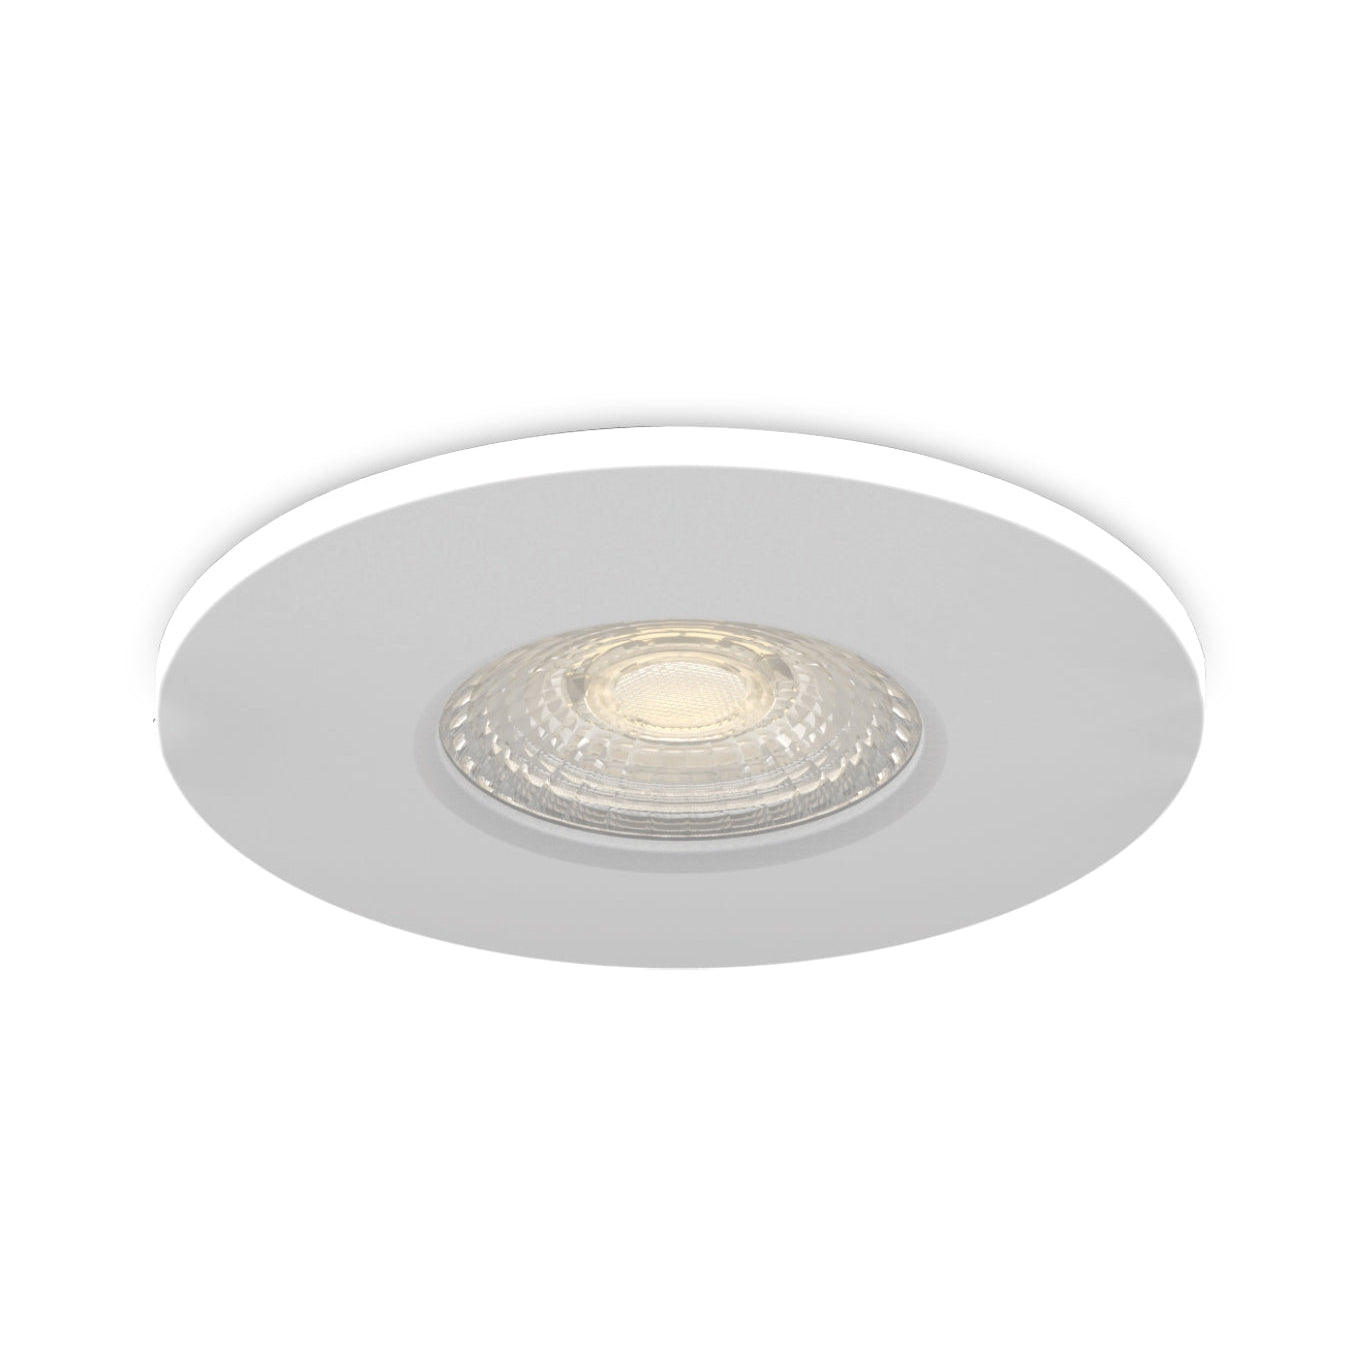 Kosnic Mauna Plus Dimmable LED Downlight Fixed